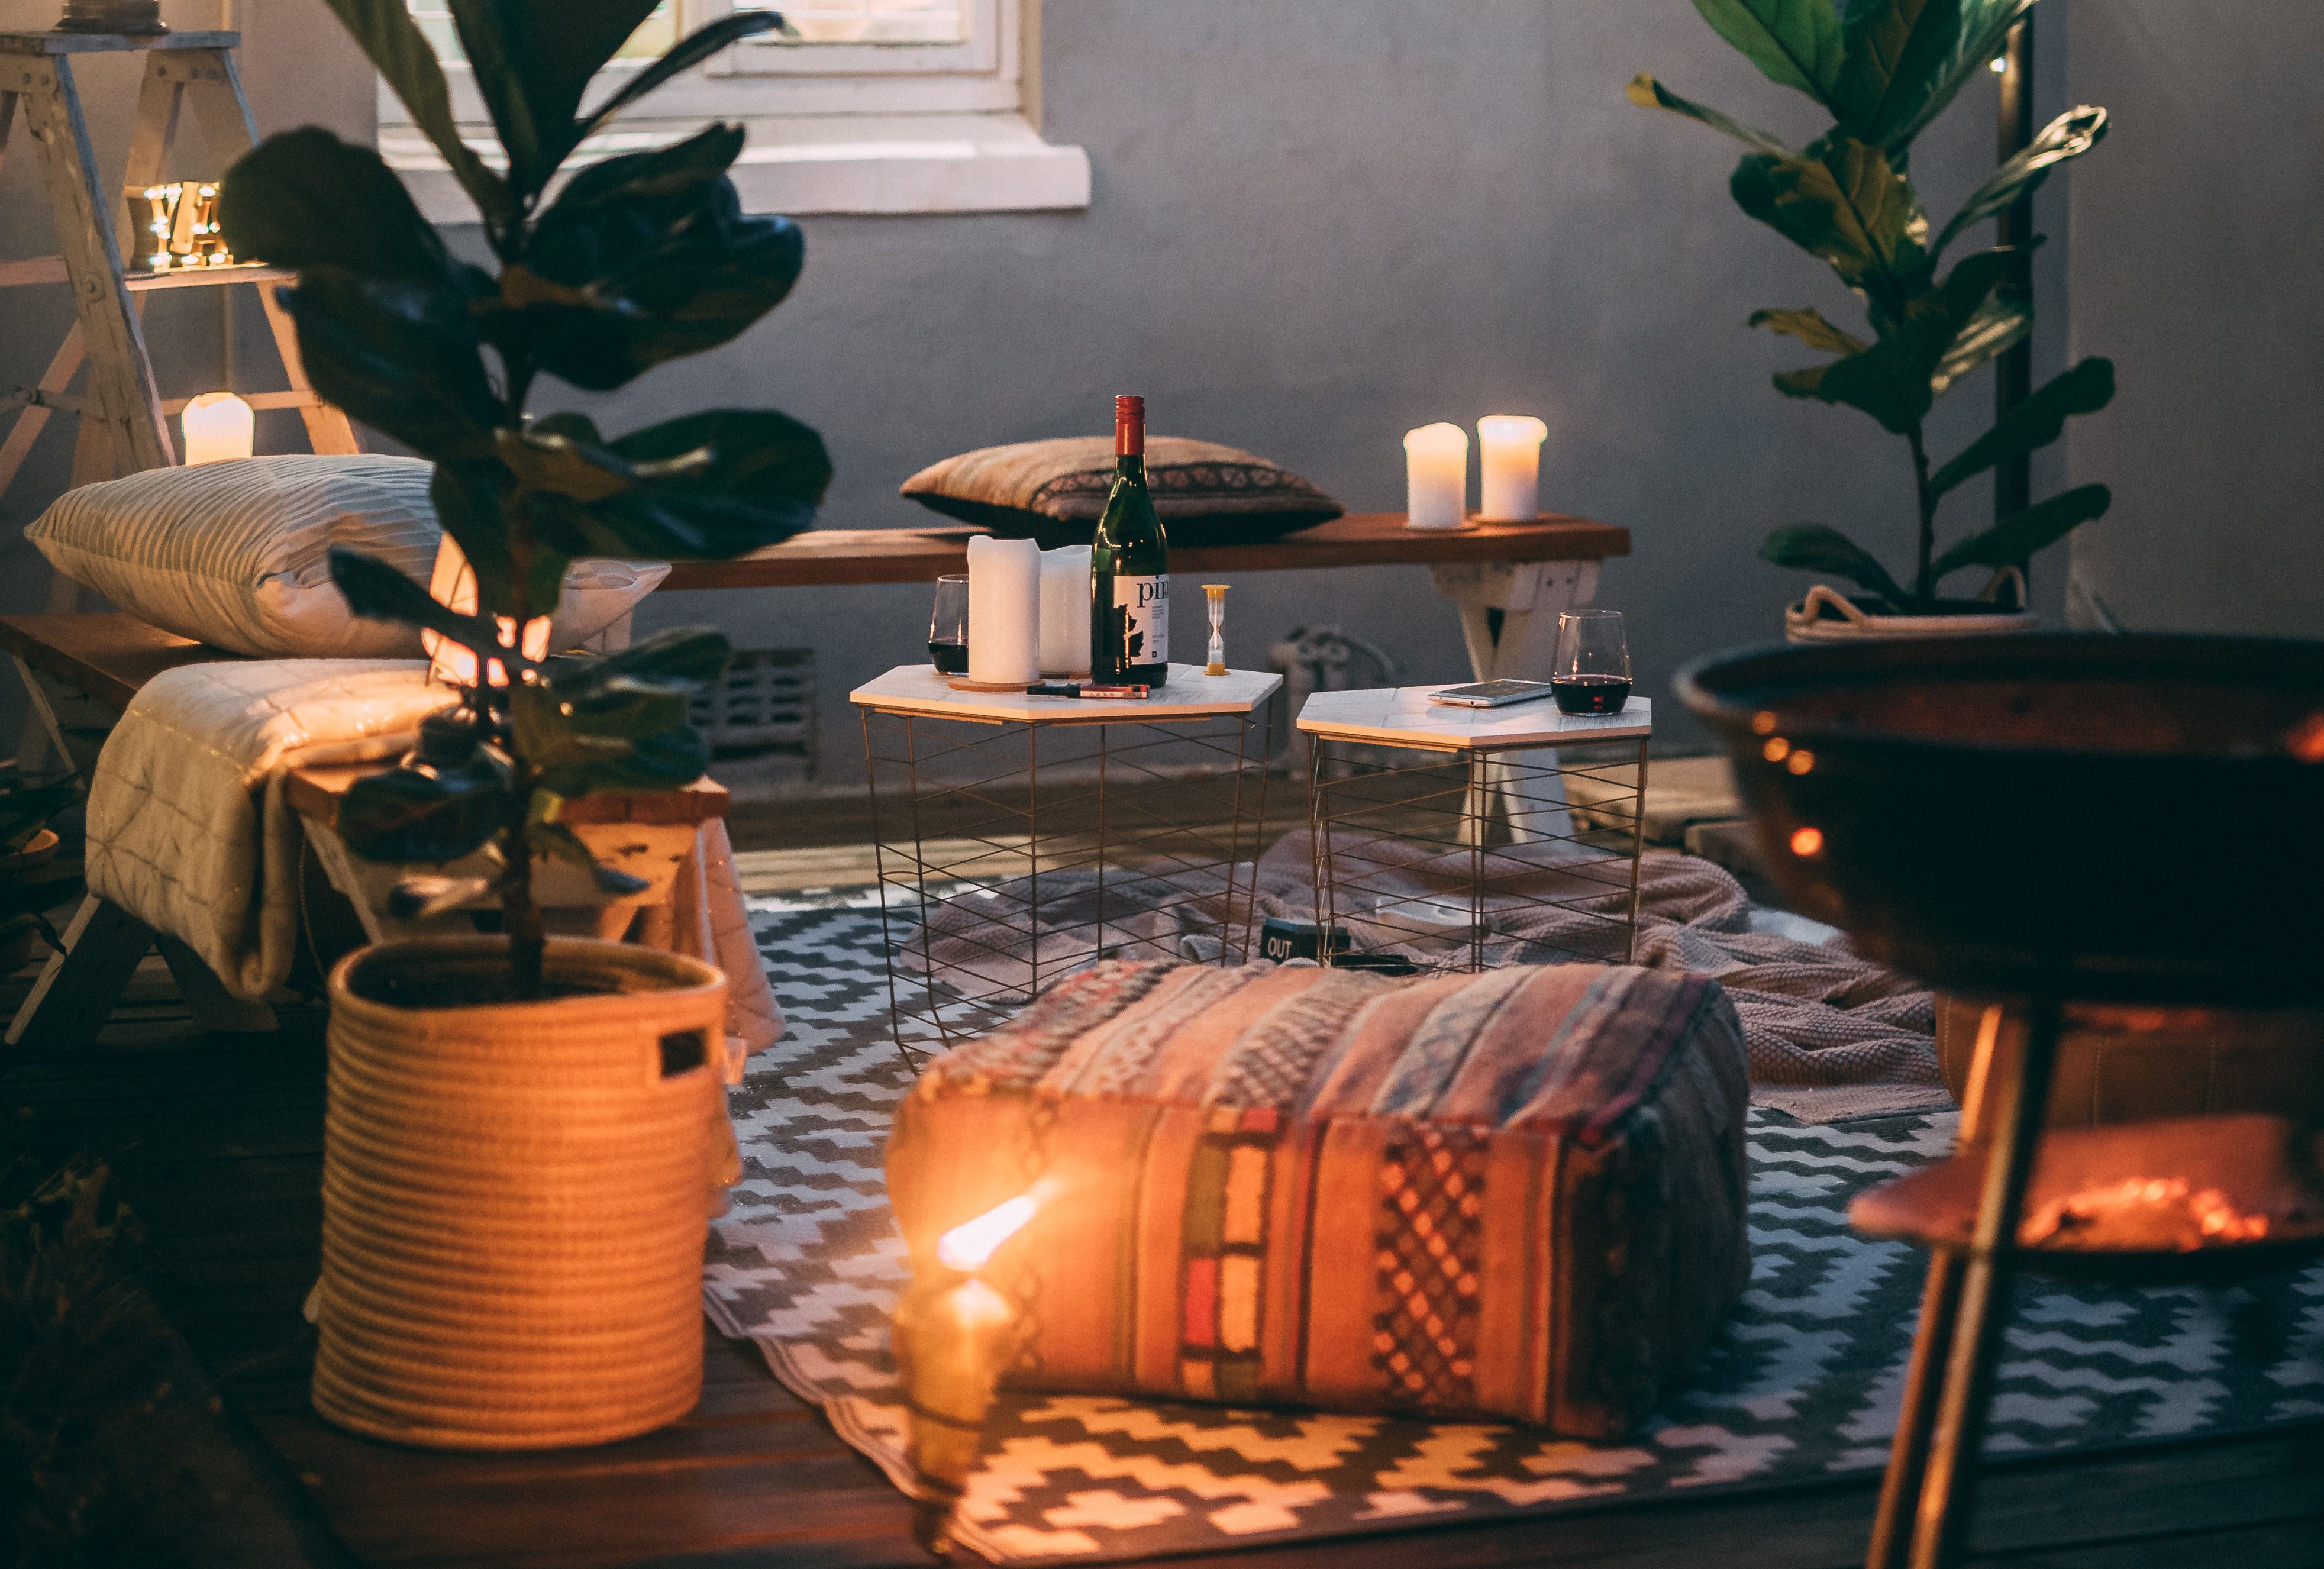 Bring Hygge to your home